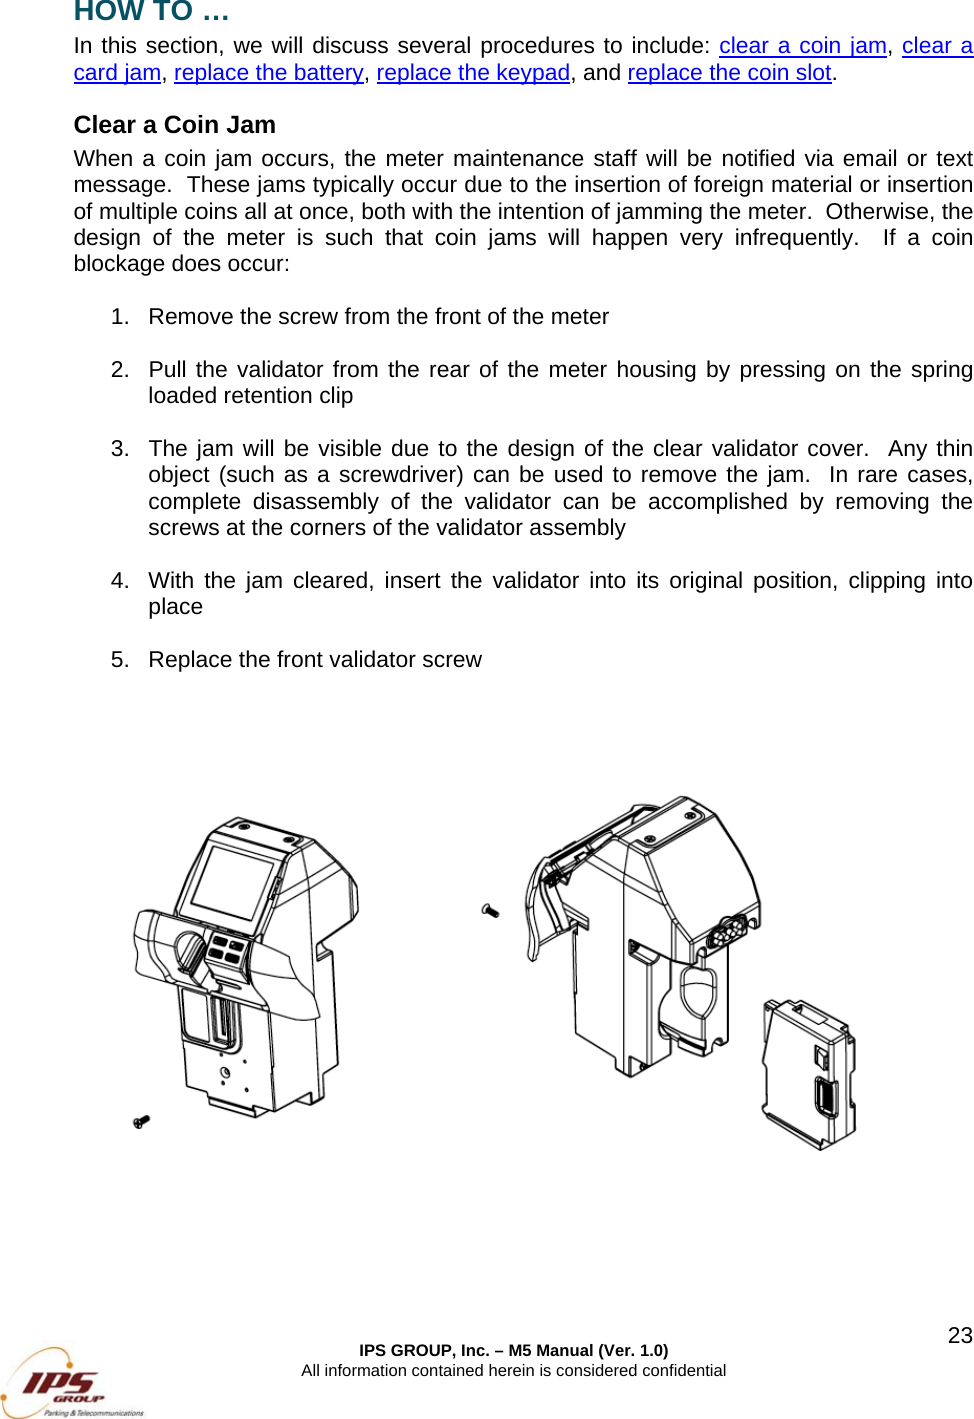  IPS GROUP, Inc. – M5 Manual (Ver. 1.0) All information contained herein is considered confidential  23HOW TO … In this section, we will discuss several procedures to include: clear a coin jam, clear a card jam, replace the battery, replace the keypad, and replace the coin slot. Clear a Coin Jam When a coin jam occurs, the meter maintenance staff will be notified via email or text message.  These jams typically occur due to the insertion of foreign material or insertion of multiple coins all at once, both with the intention of jamming the meter.  Otherwise, the design of the meter is such that coin jams will happen very infrequently.  If a coin blockage does occur:  1.  Remove the screw from the front of the meter    2.  Pull the validator from the rear of the meter housing by pressing on the spring loaded retention clip  3.  The jam will be visible due to the design of the clear validator cover.  Any thin object (such as a screwdriver) can be used to remove the jam.  In rare cases, complete disassembly of the validator can be accomplished by removing the screws at the corners of the validator assembly  4.  With the jam cleared, insert the validator into its original position, clipping into place  5.  Replace the front validator screw      